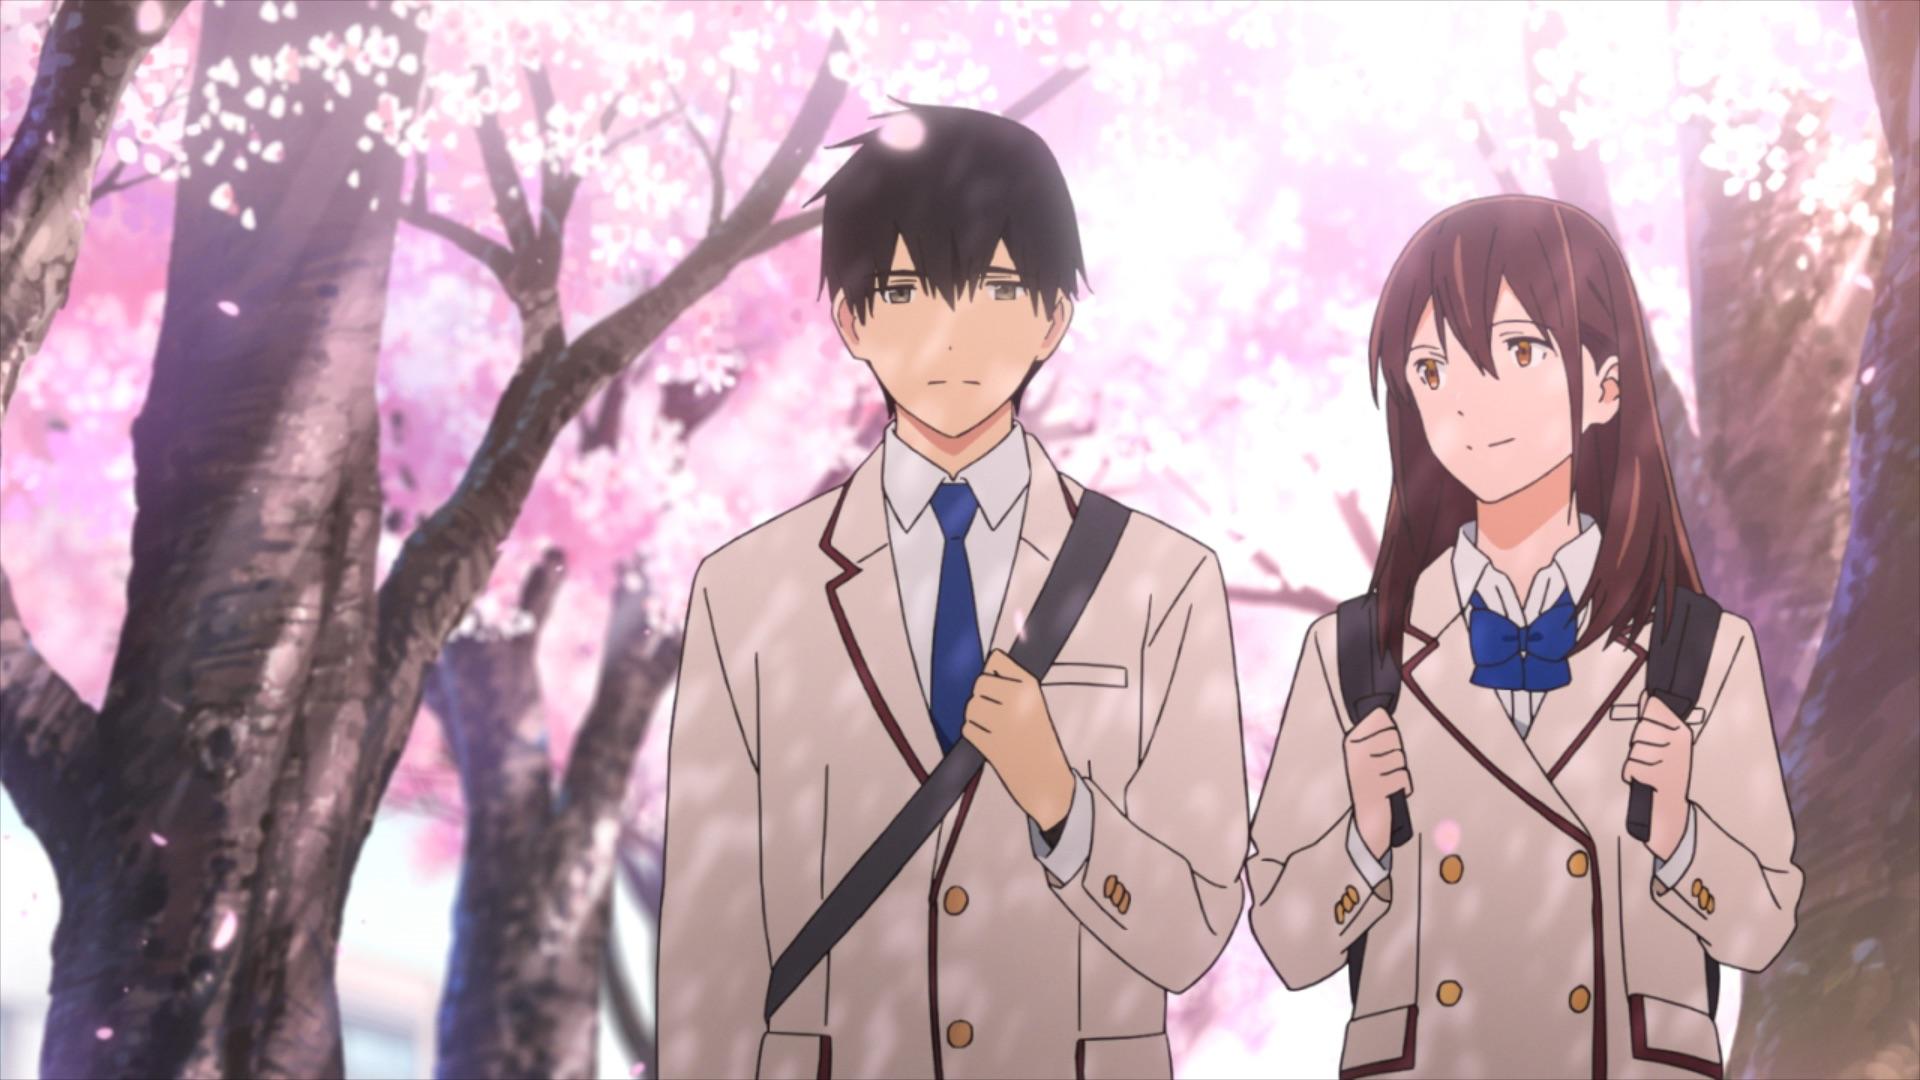 I Want To Eat Your Pancreas Wallpaper For Pc, I Want To Eat Your Pancreas Wallpaper, Anime